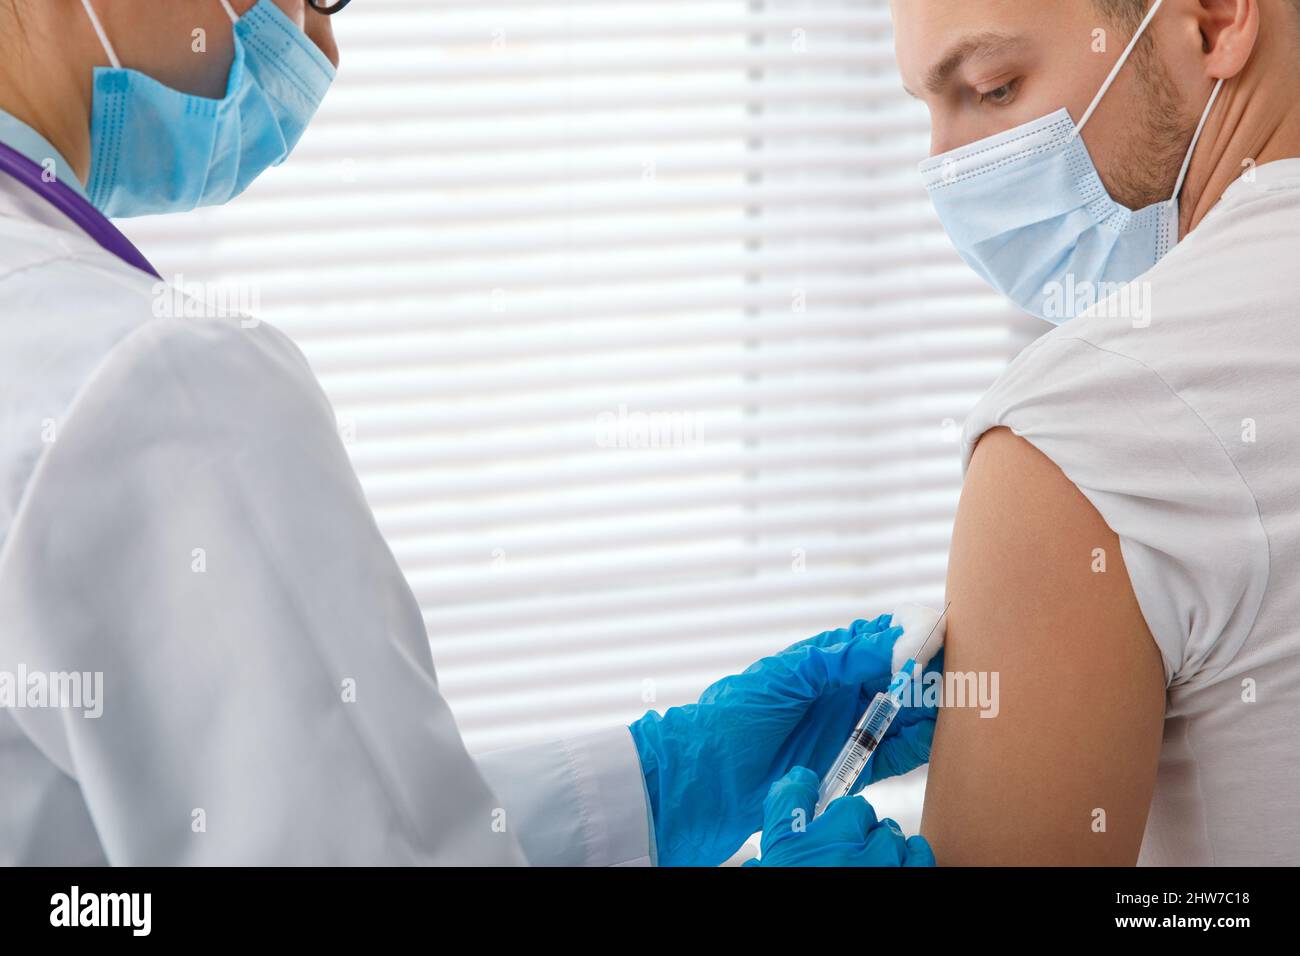 The doctor holds a syringe before giving an injection to a patient in a medical mask. Covid-19 or coronavirus vaccine. Vaccination of the population Stock Photo